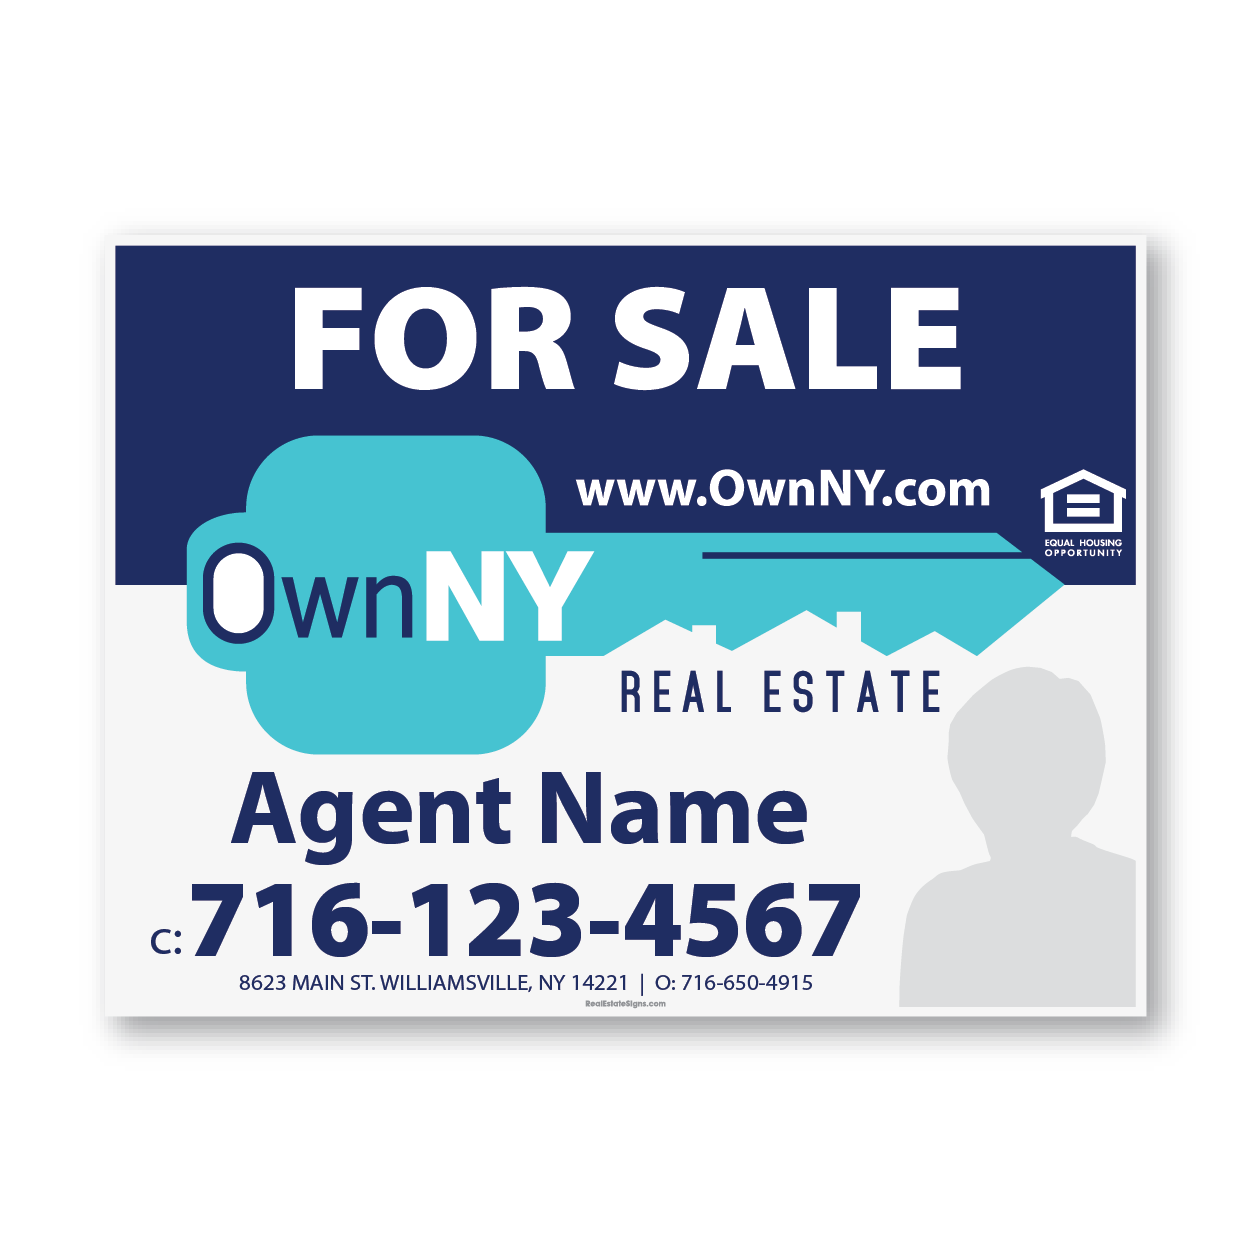 CD-1-1824-OWN-Agent_Photo